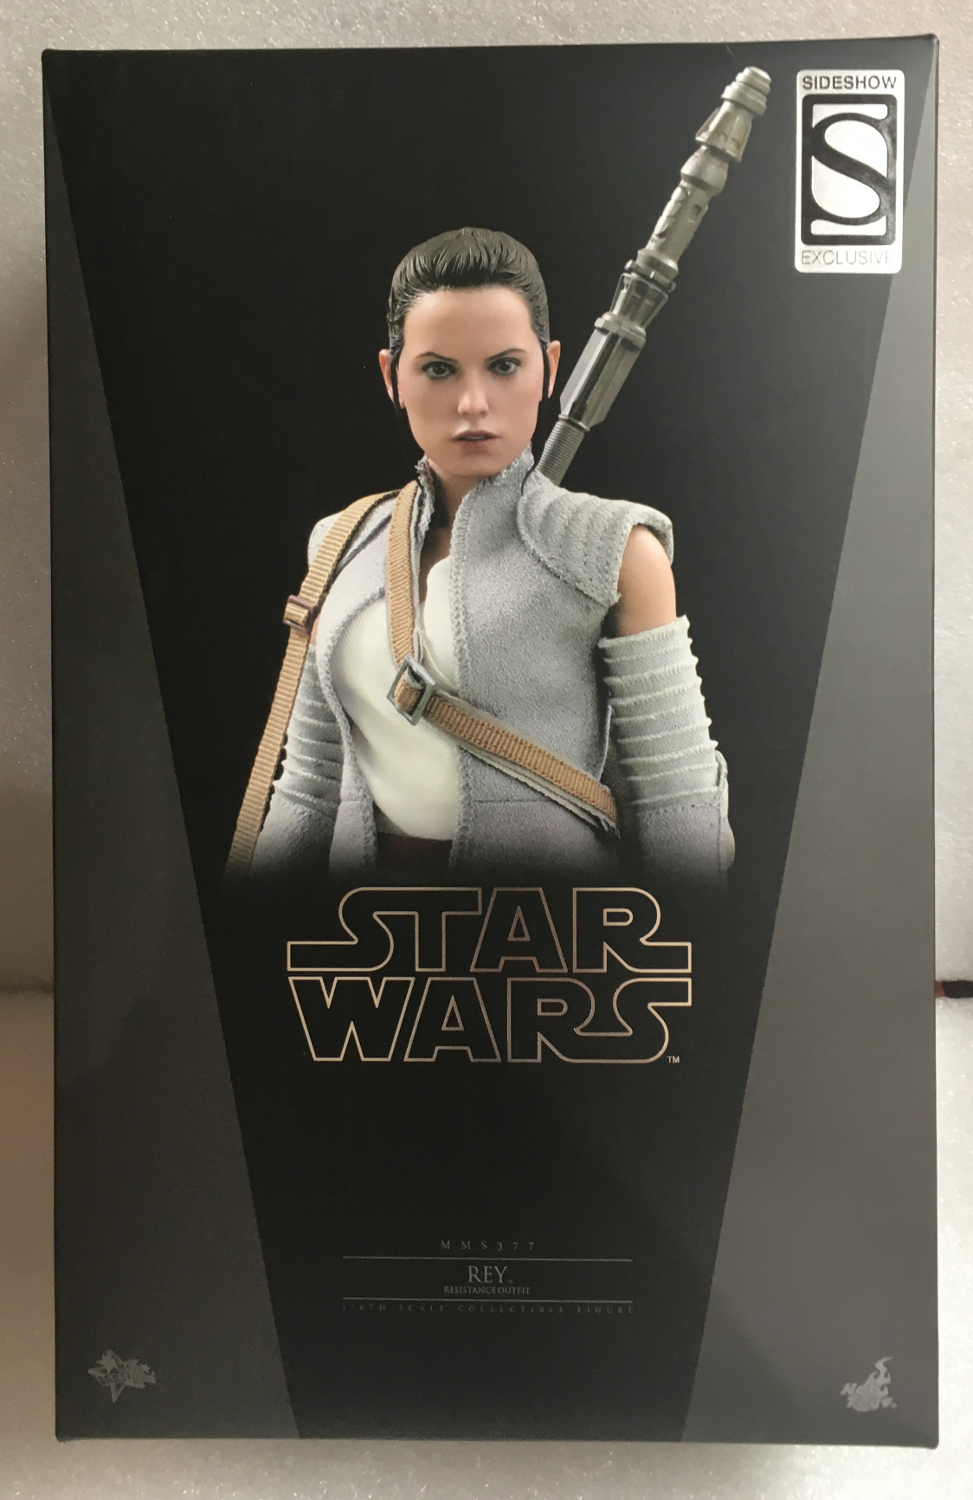 Hot Toys Sideshow Exclusive Force Awakens Star Wars Rey 1:6 Scale Figure - LAST ONE!